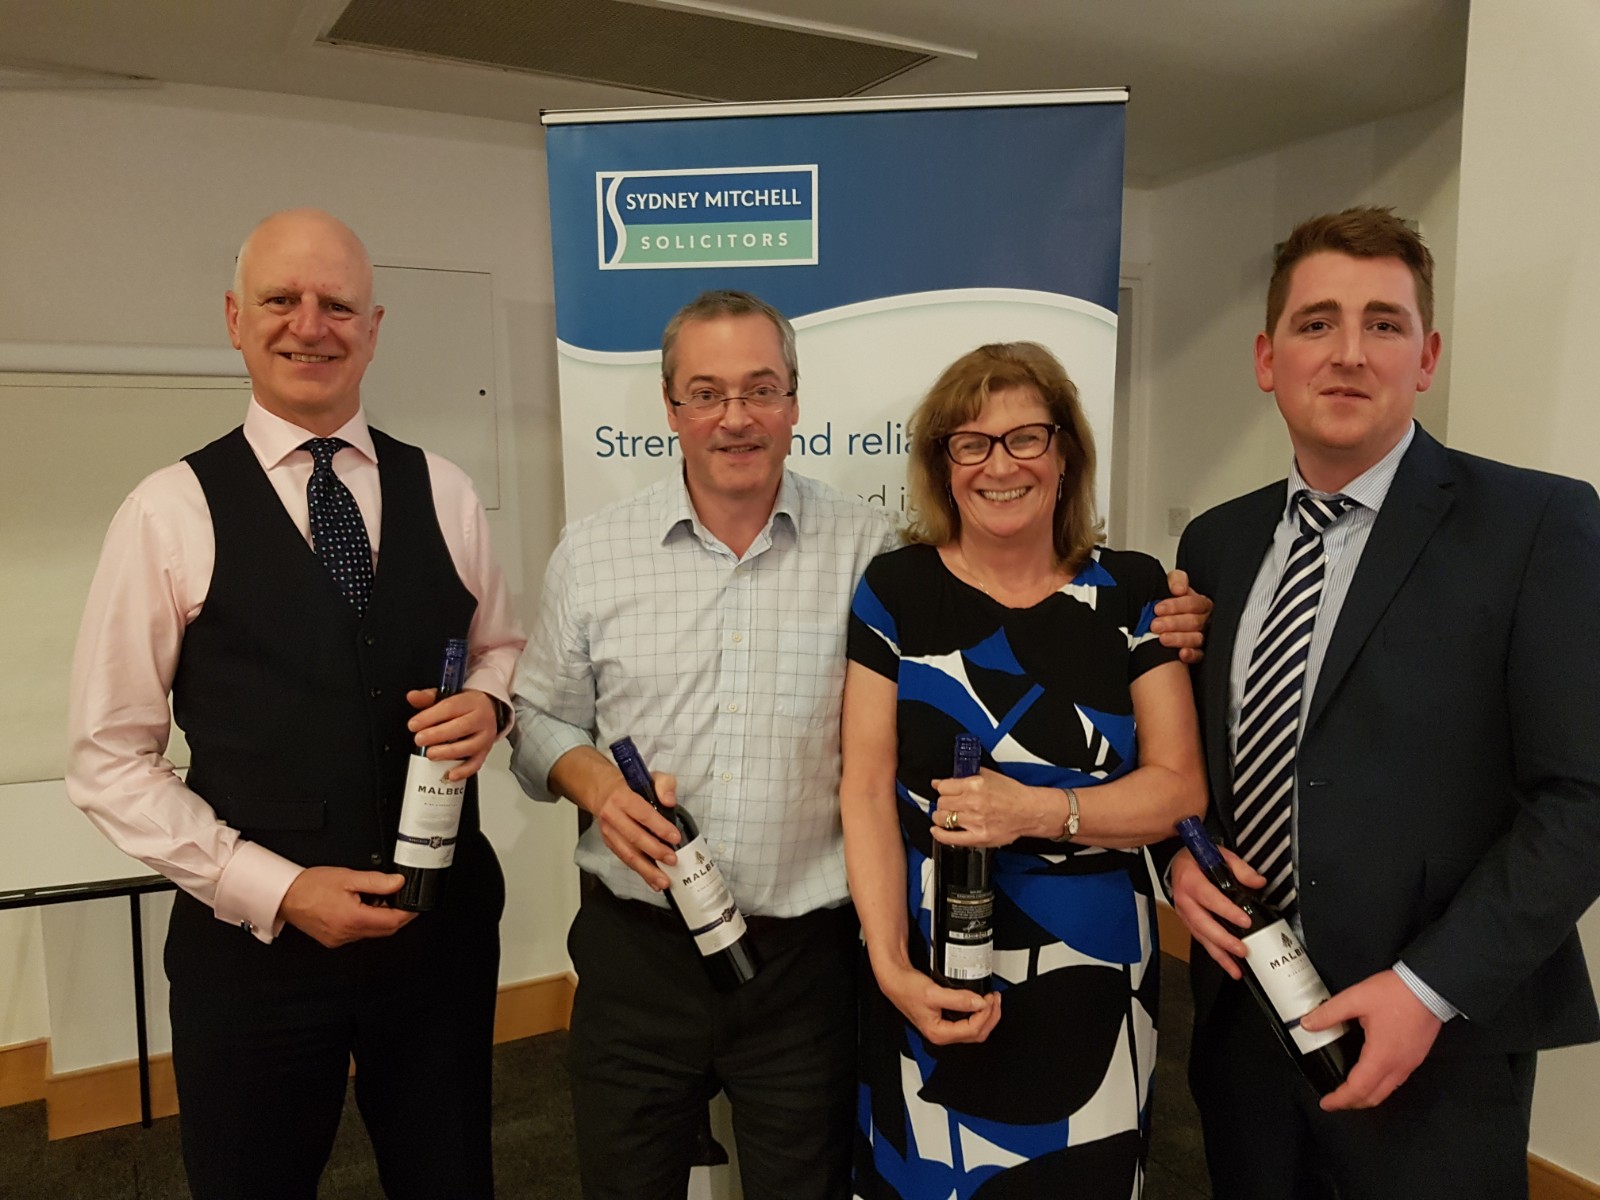 3rd place - Eastcote Wealth Management - Sydney Mitchell charity quiz 2018